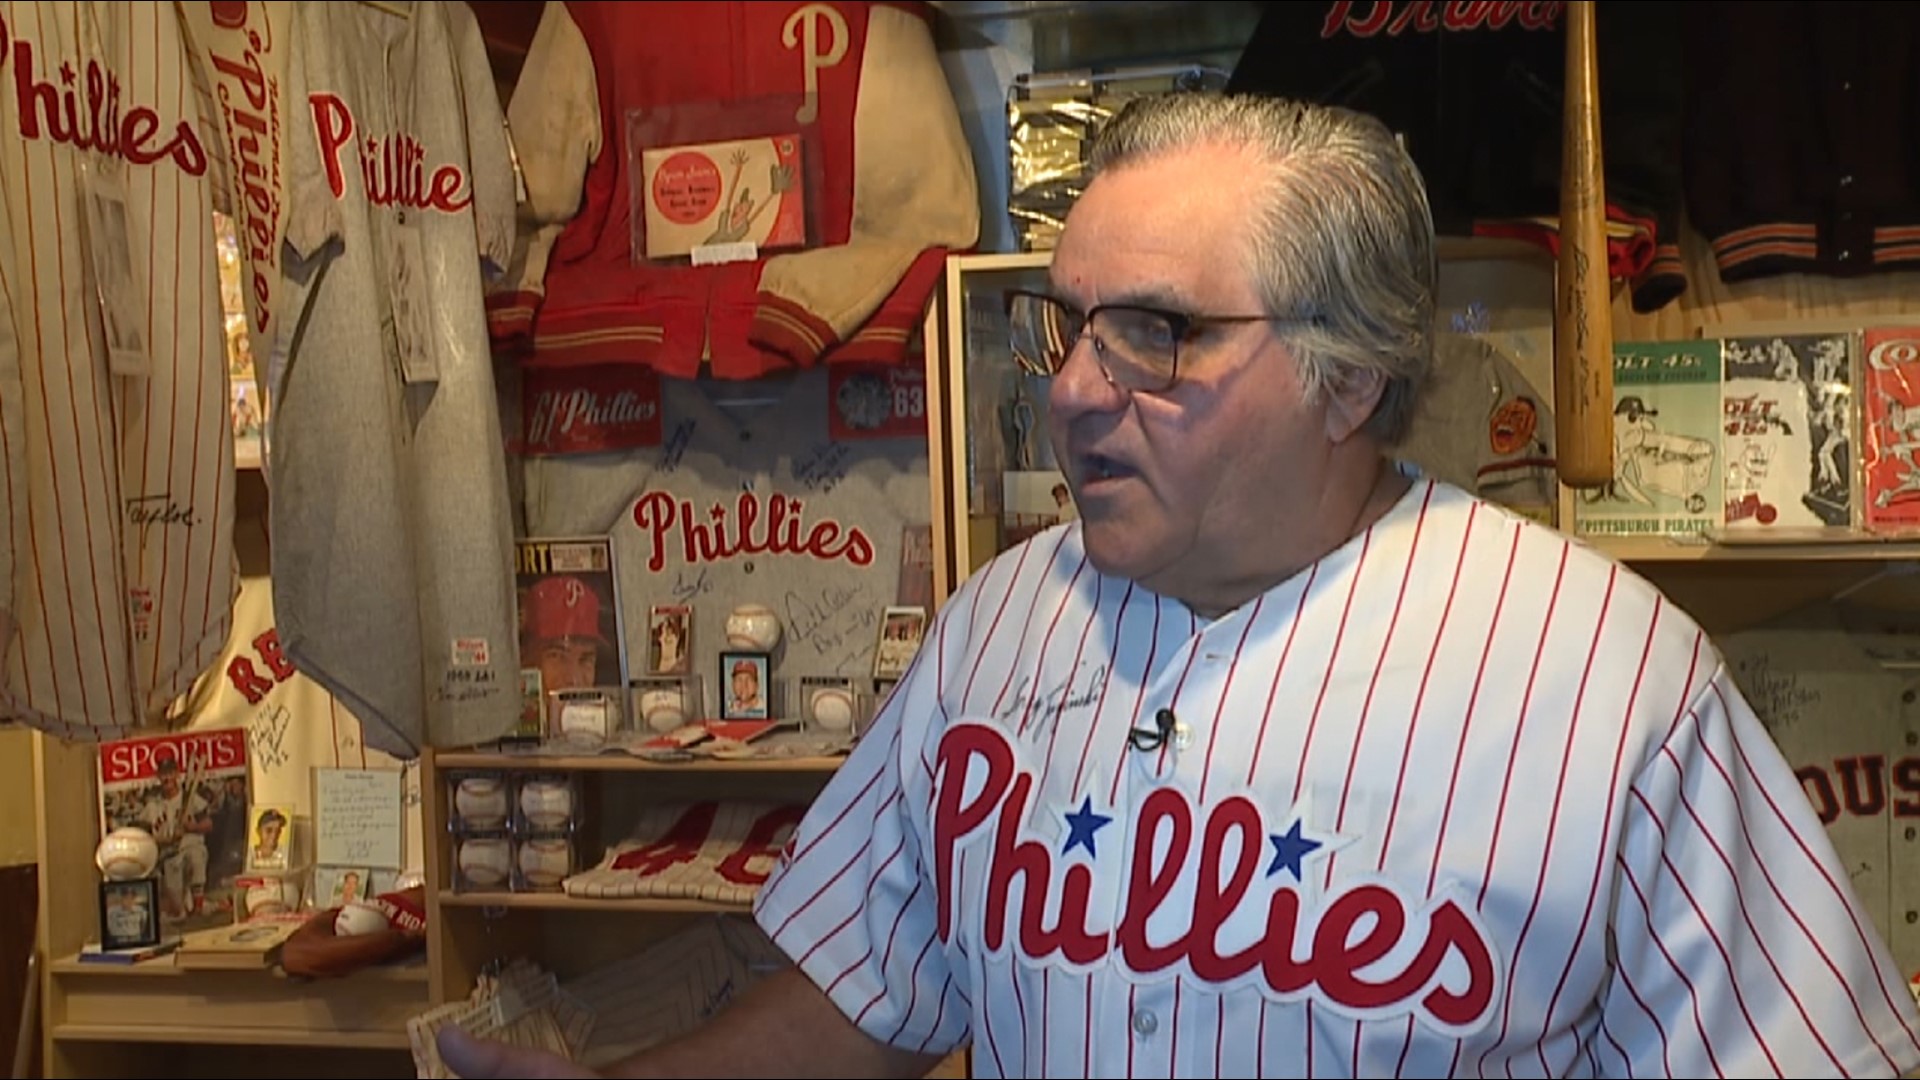 Middletown man captures baseball history in collection